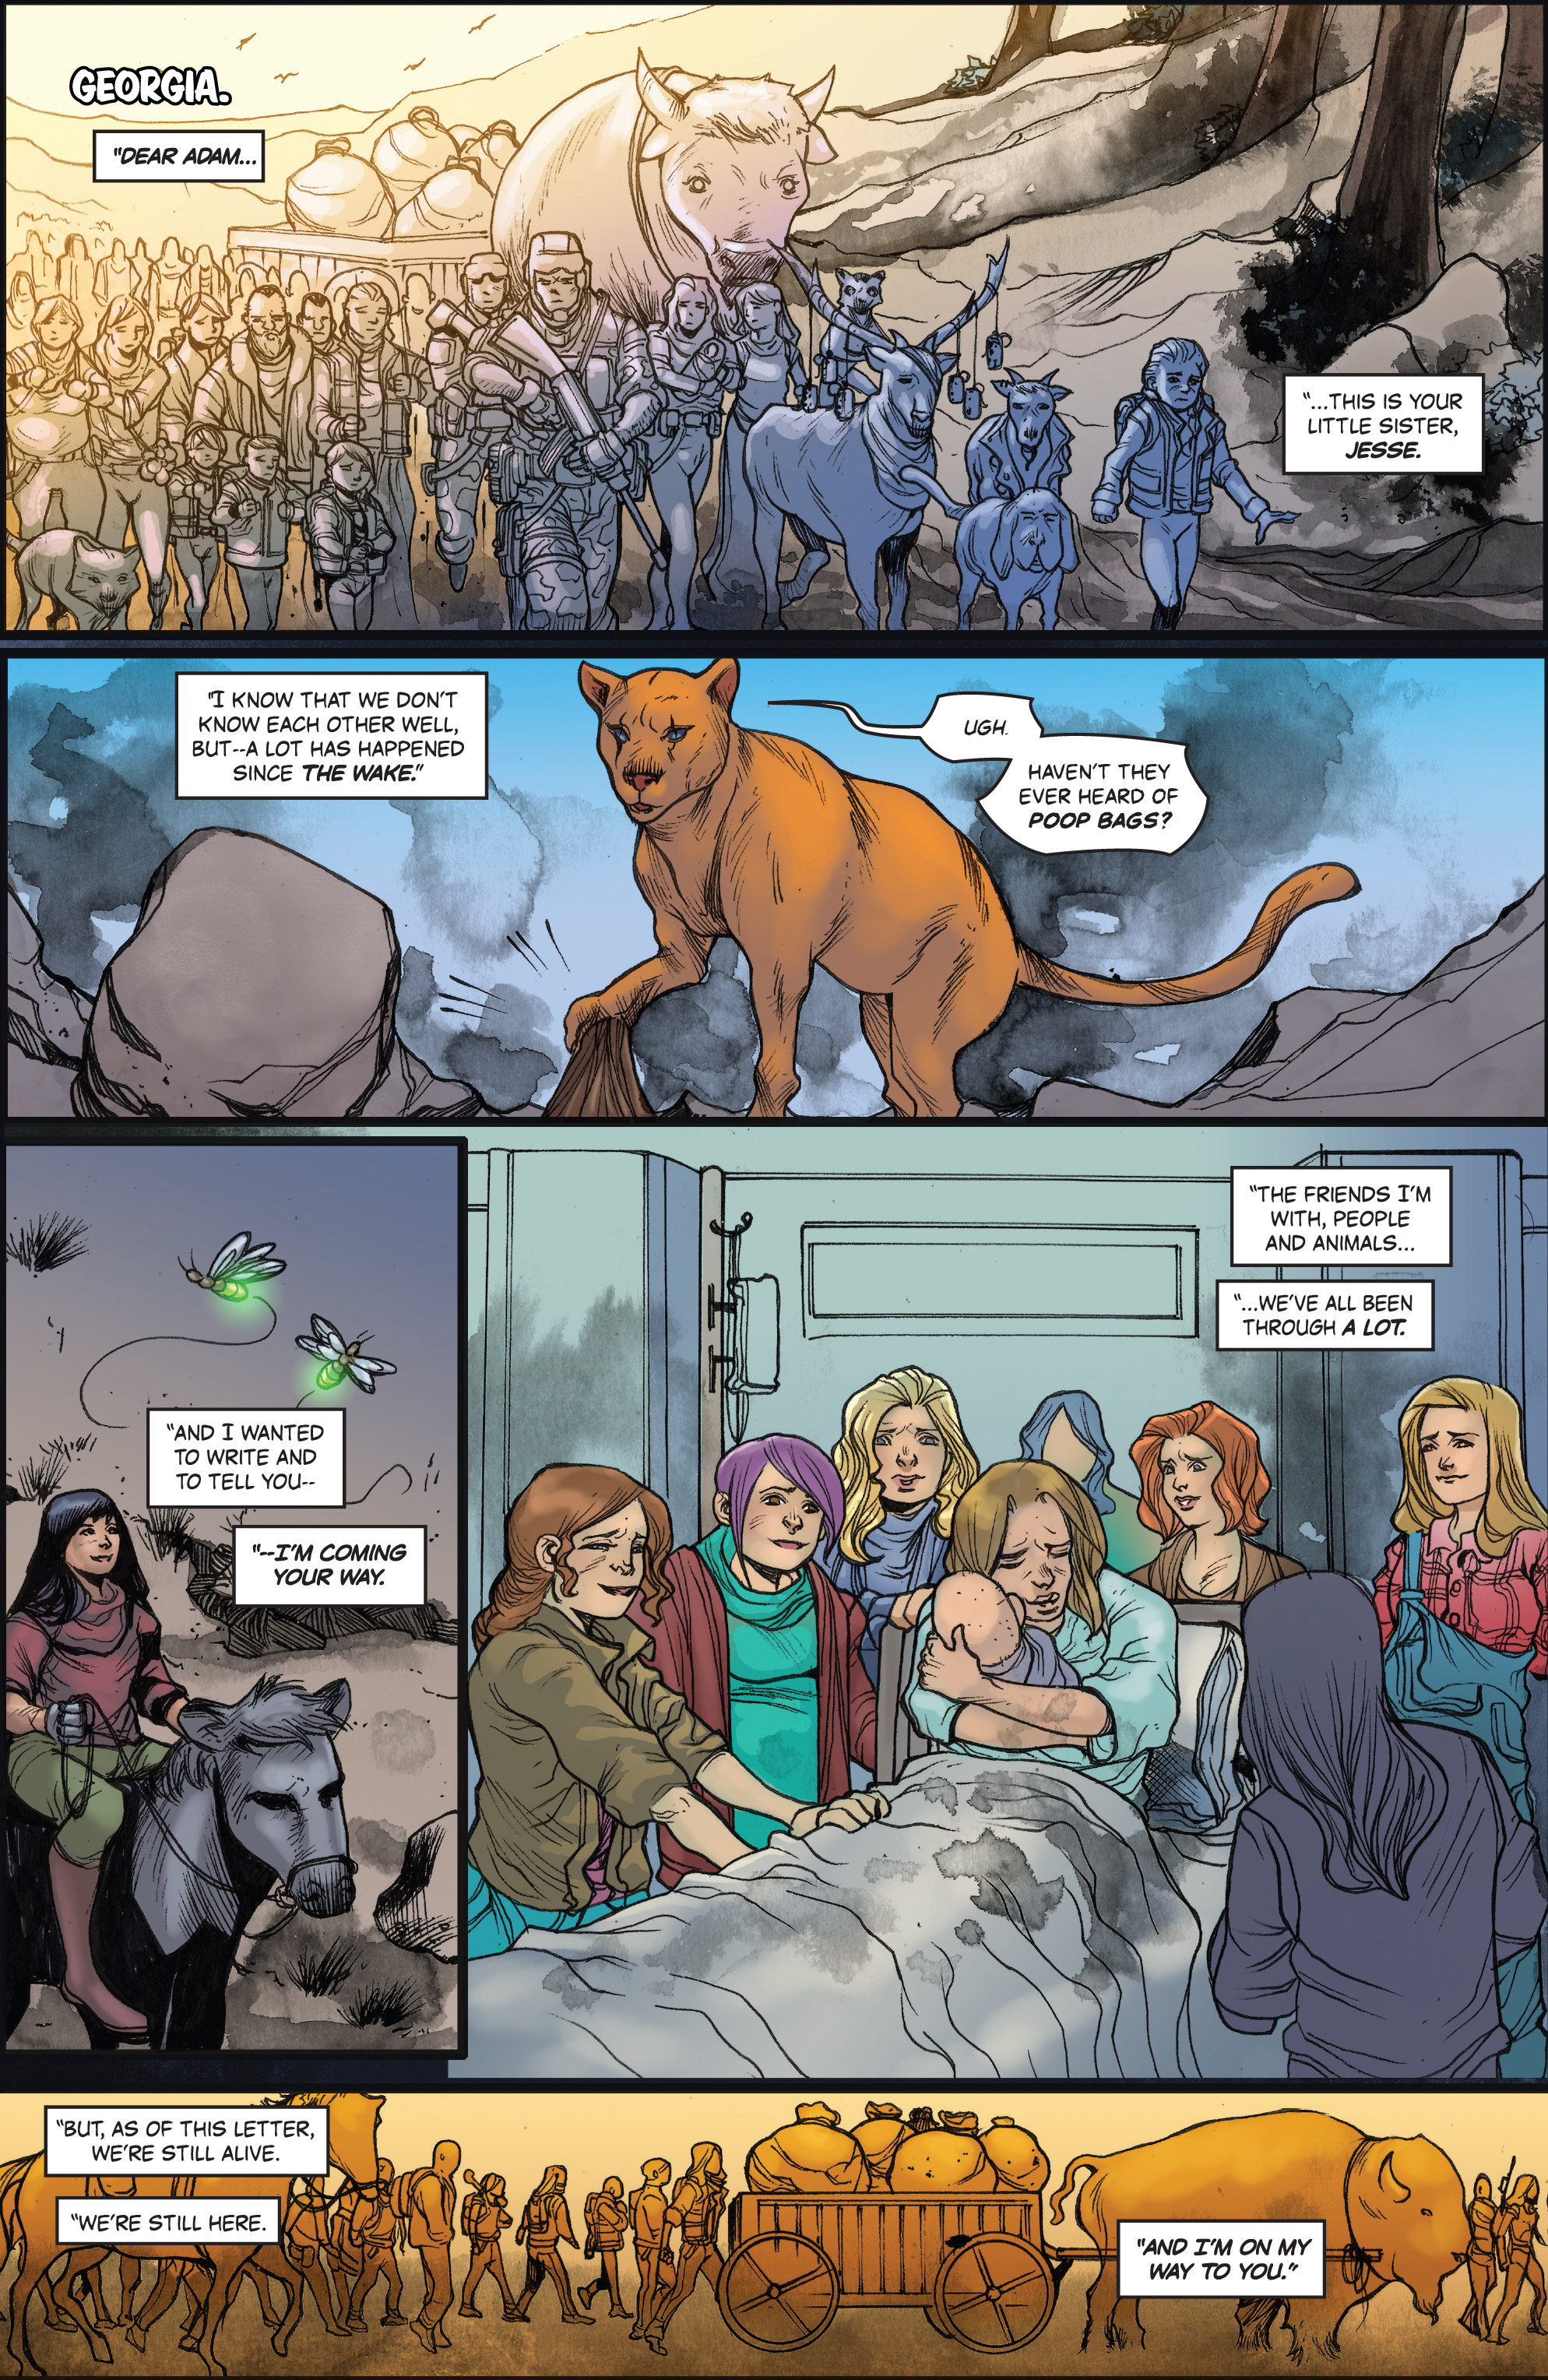 Animosity (2016-): Chapter 23 - Page 3